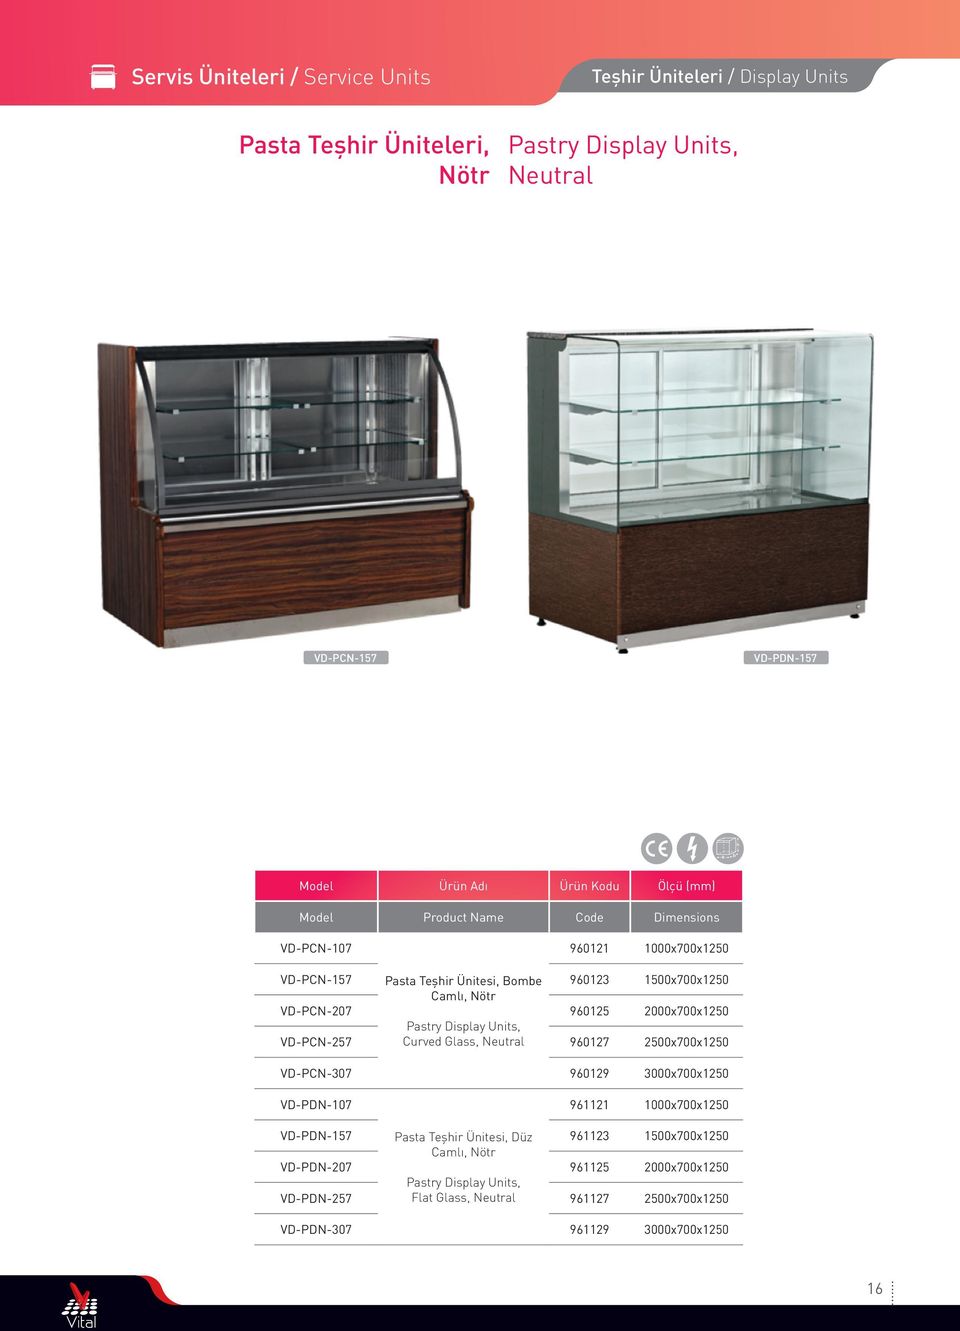 VD-PCN-257 Pastry Display Units, Curved Glass, Neutral 960127 2500x700x1250 VD-PCN-307 960129 3000x700x1250 VD-PDN-107 961121 1000x700x1250 VD-PDN-157 VD-PDN-207 Pasta